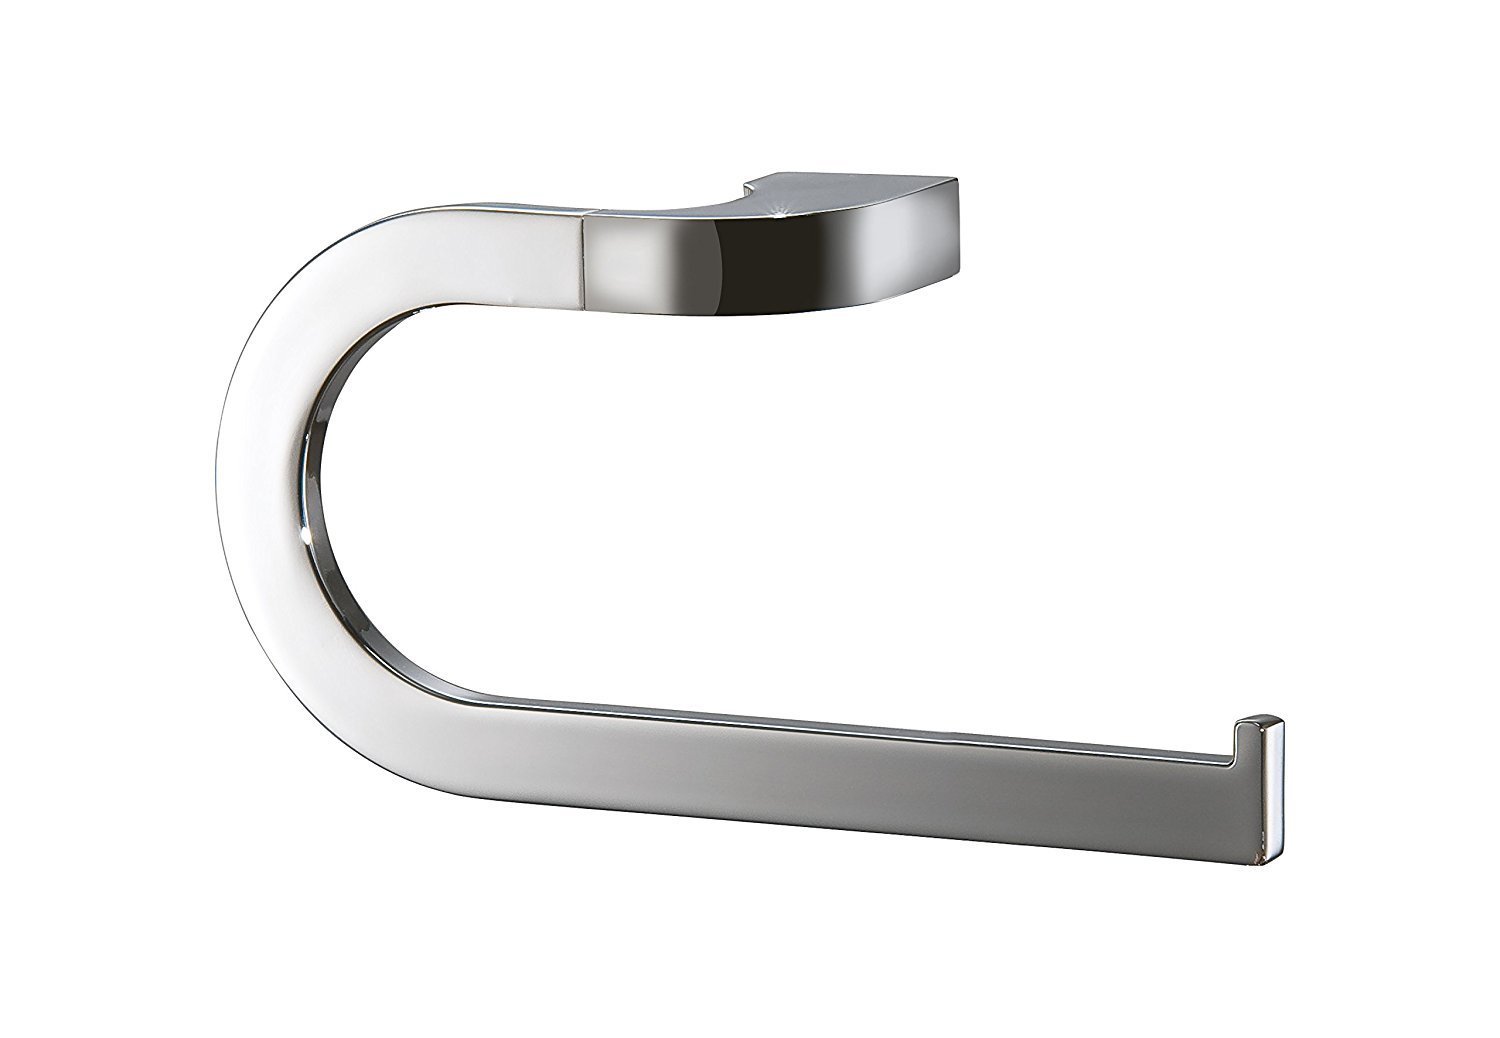 Primary image for Chloe Polished chrome small towel ring. Hand towel holder.